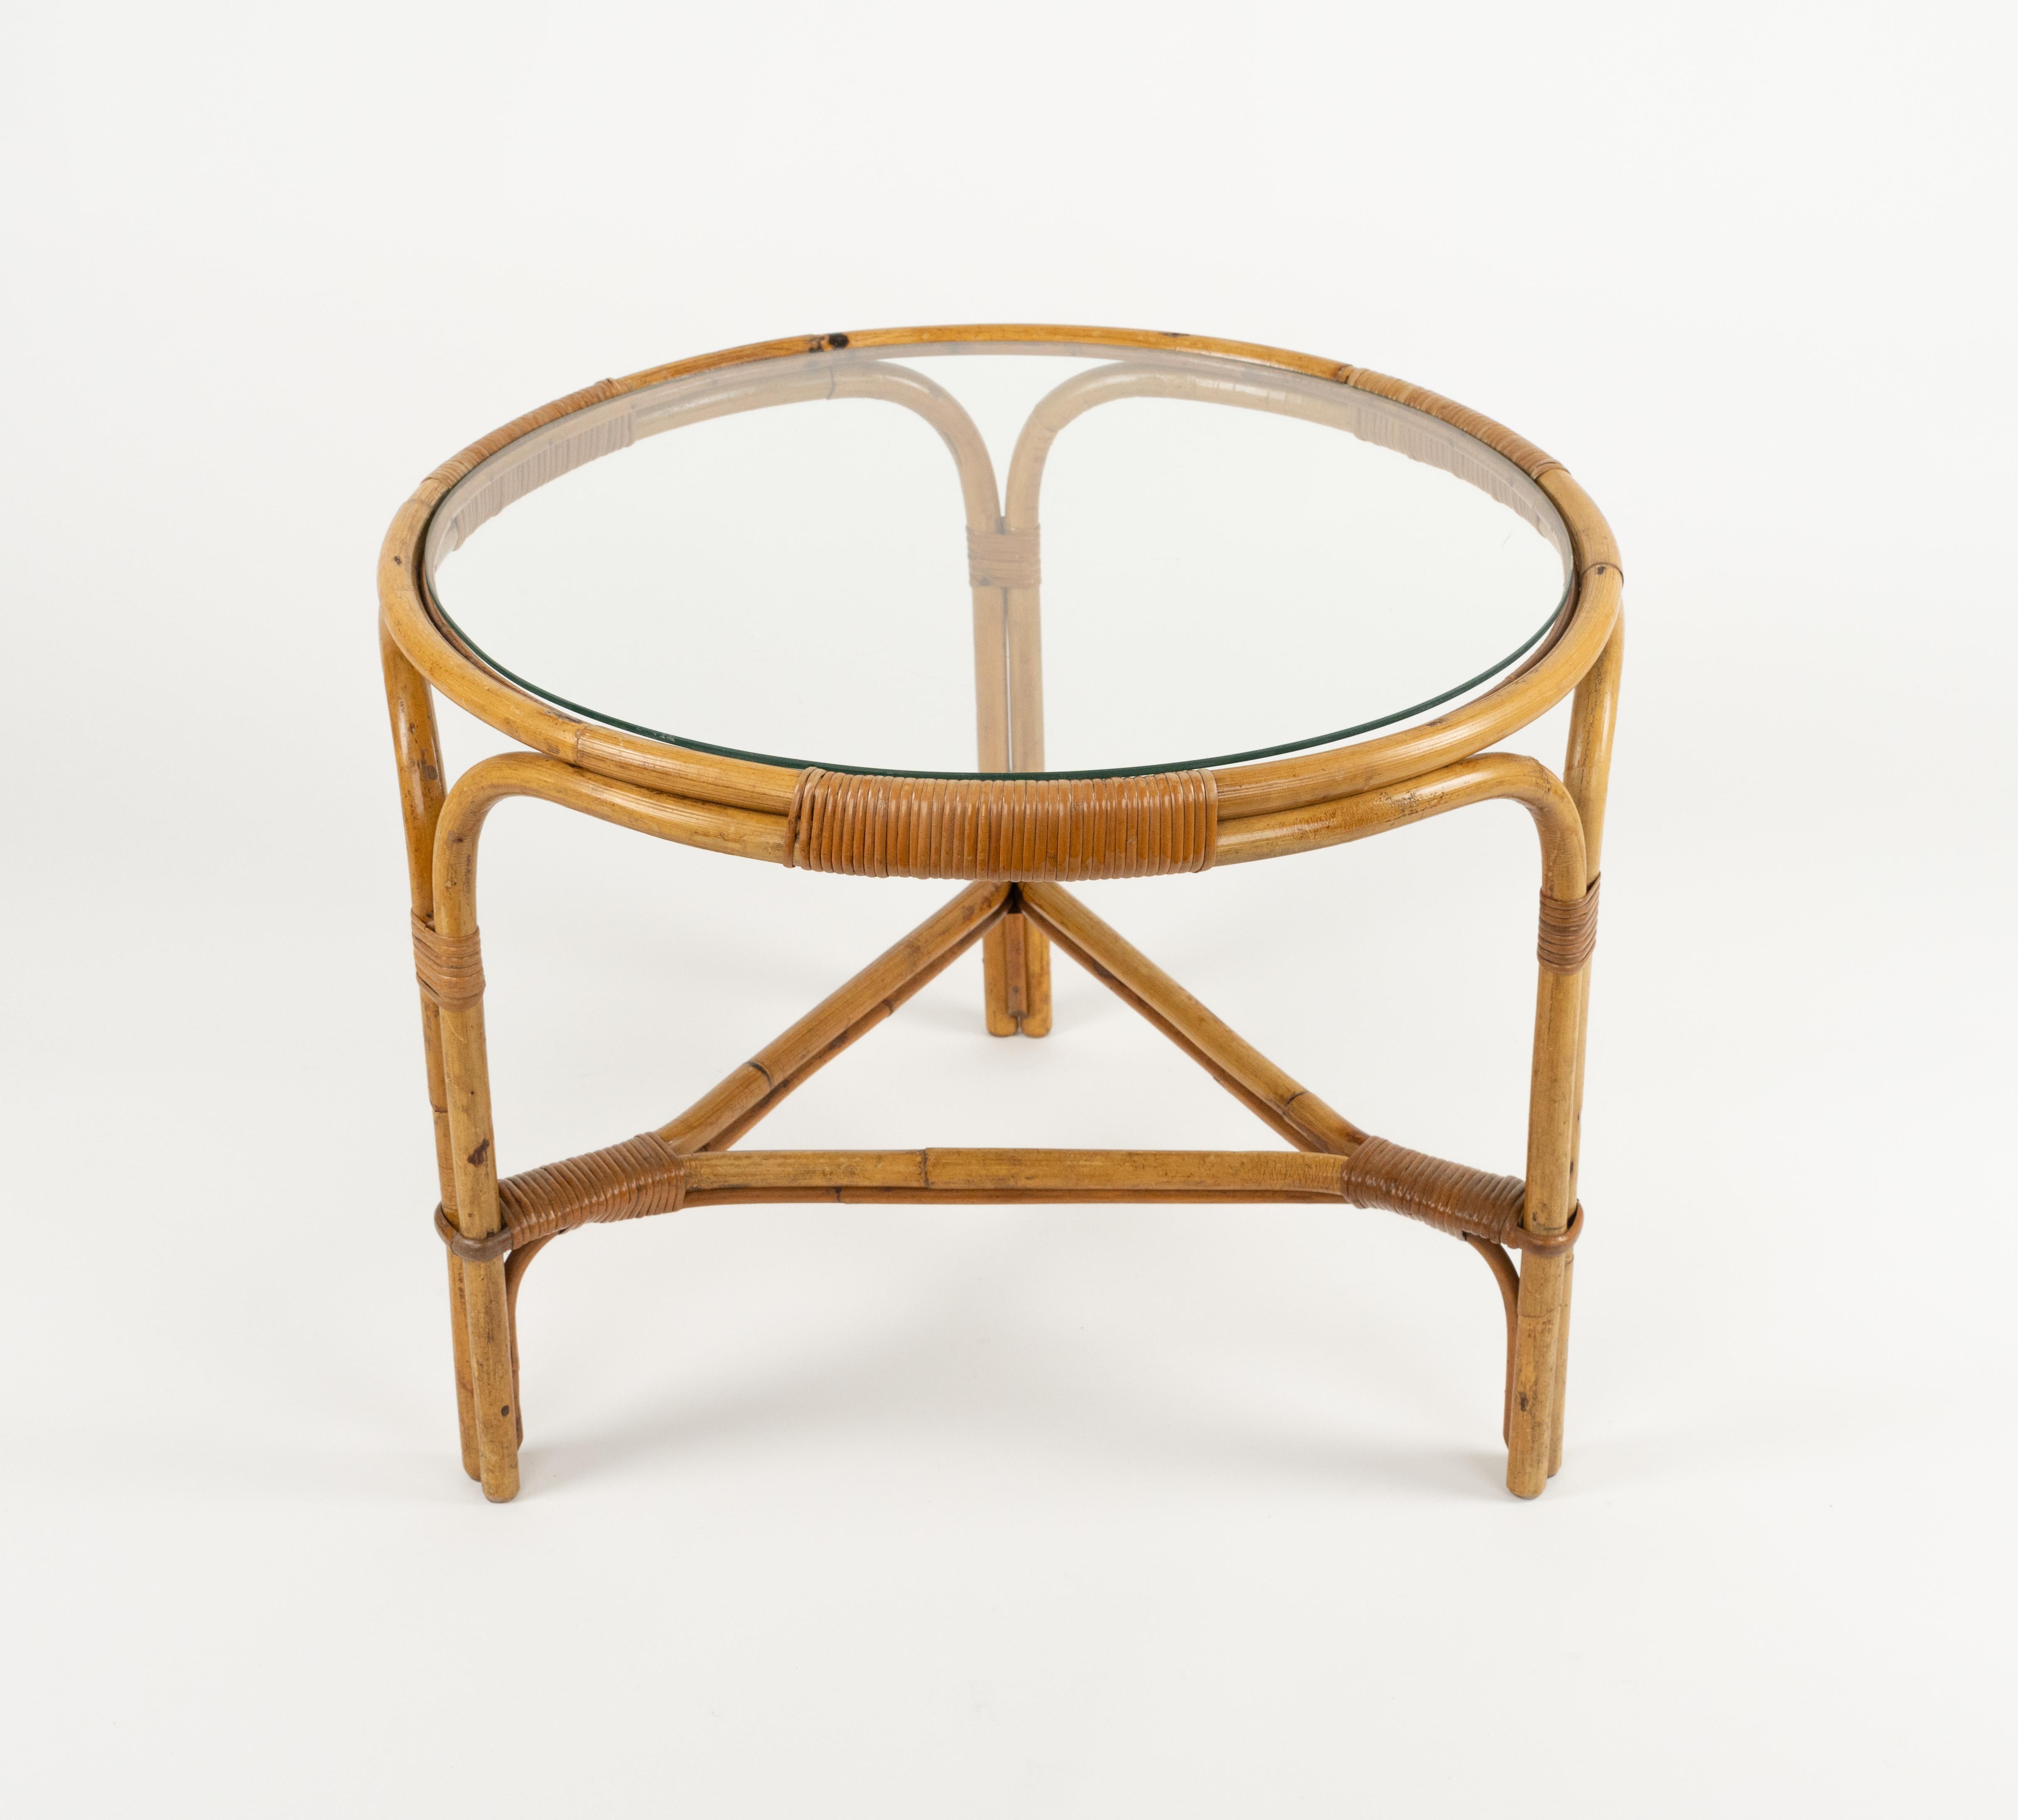 Mid-20th Century Midcentury Round Coffee Table in Bamboo, Rattan and Glass, Italy 1960s For Sale